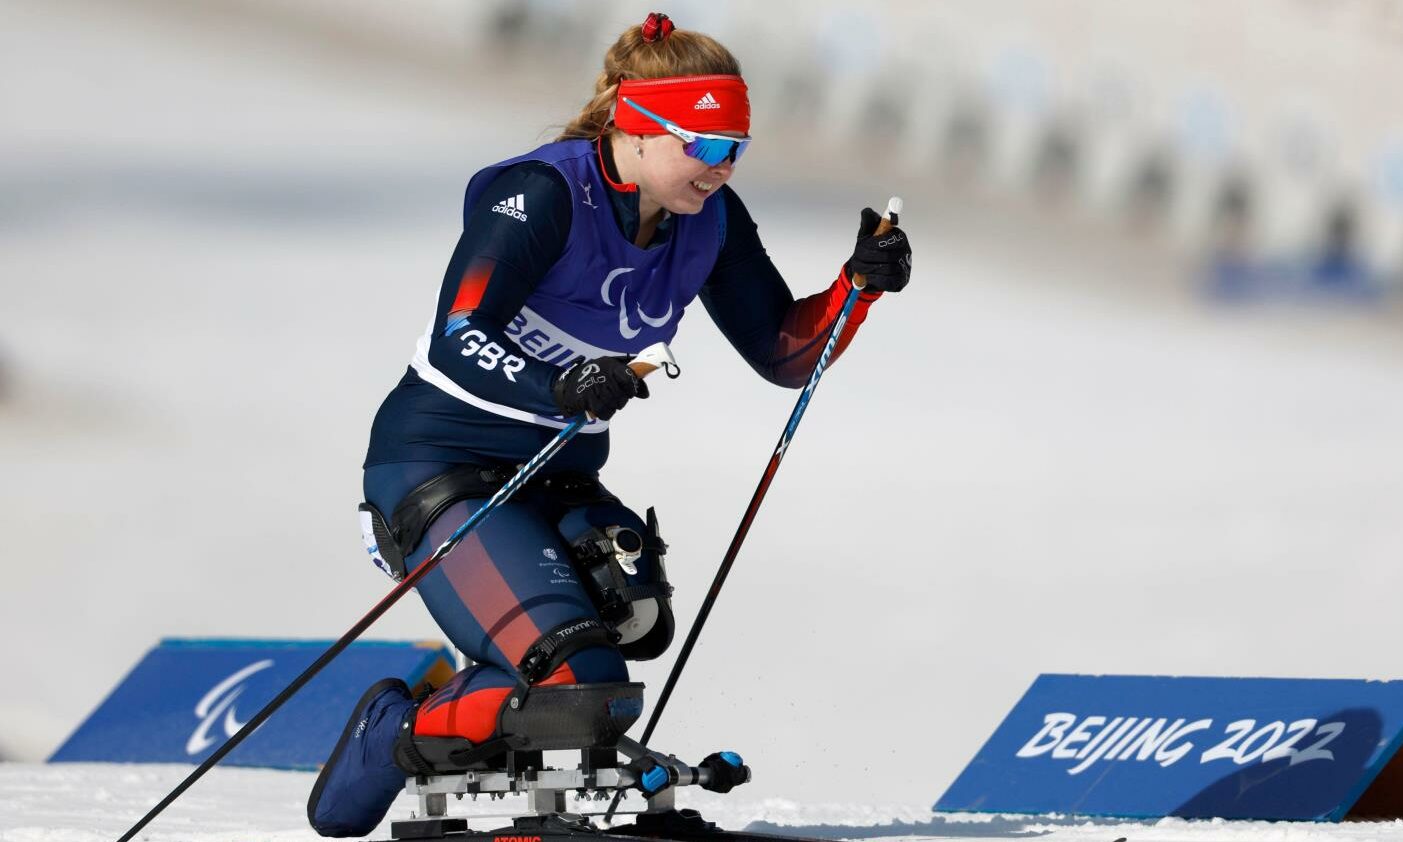 Golspie's Hope Gordon finished 16th in the 7.5km sitting cross-country skiing event at the Beijing Winter Parlamypics. REUTERS/Issei Kato